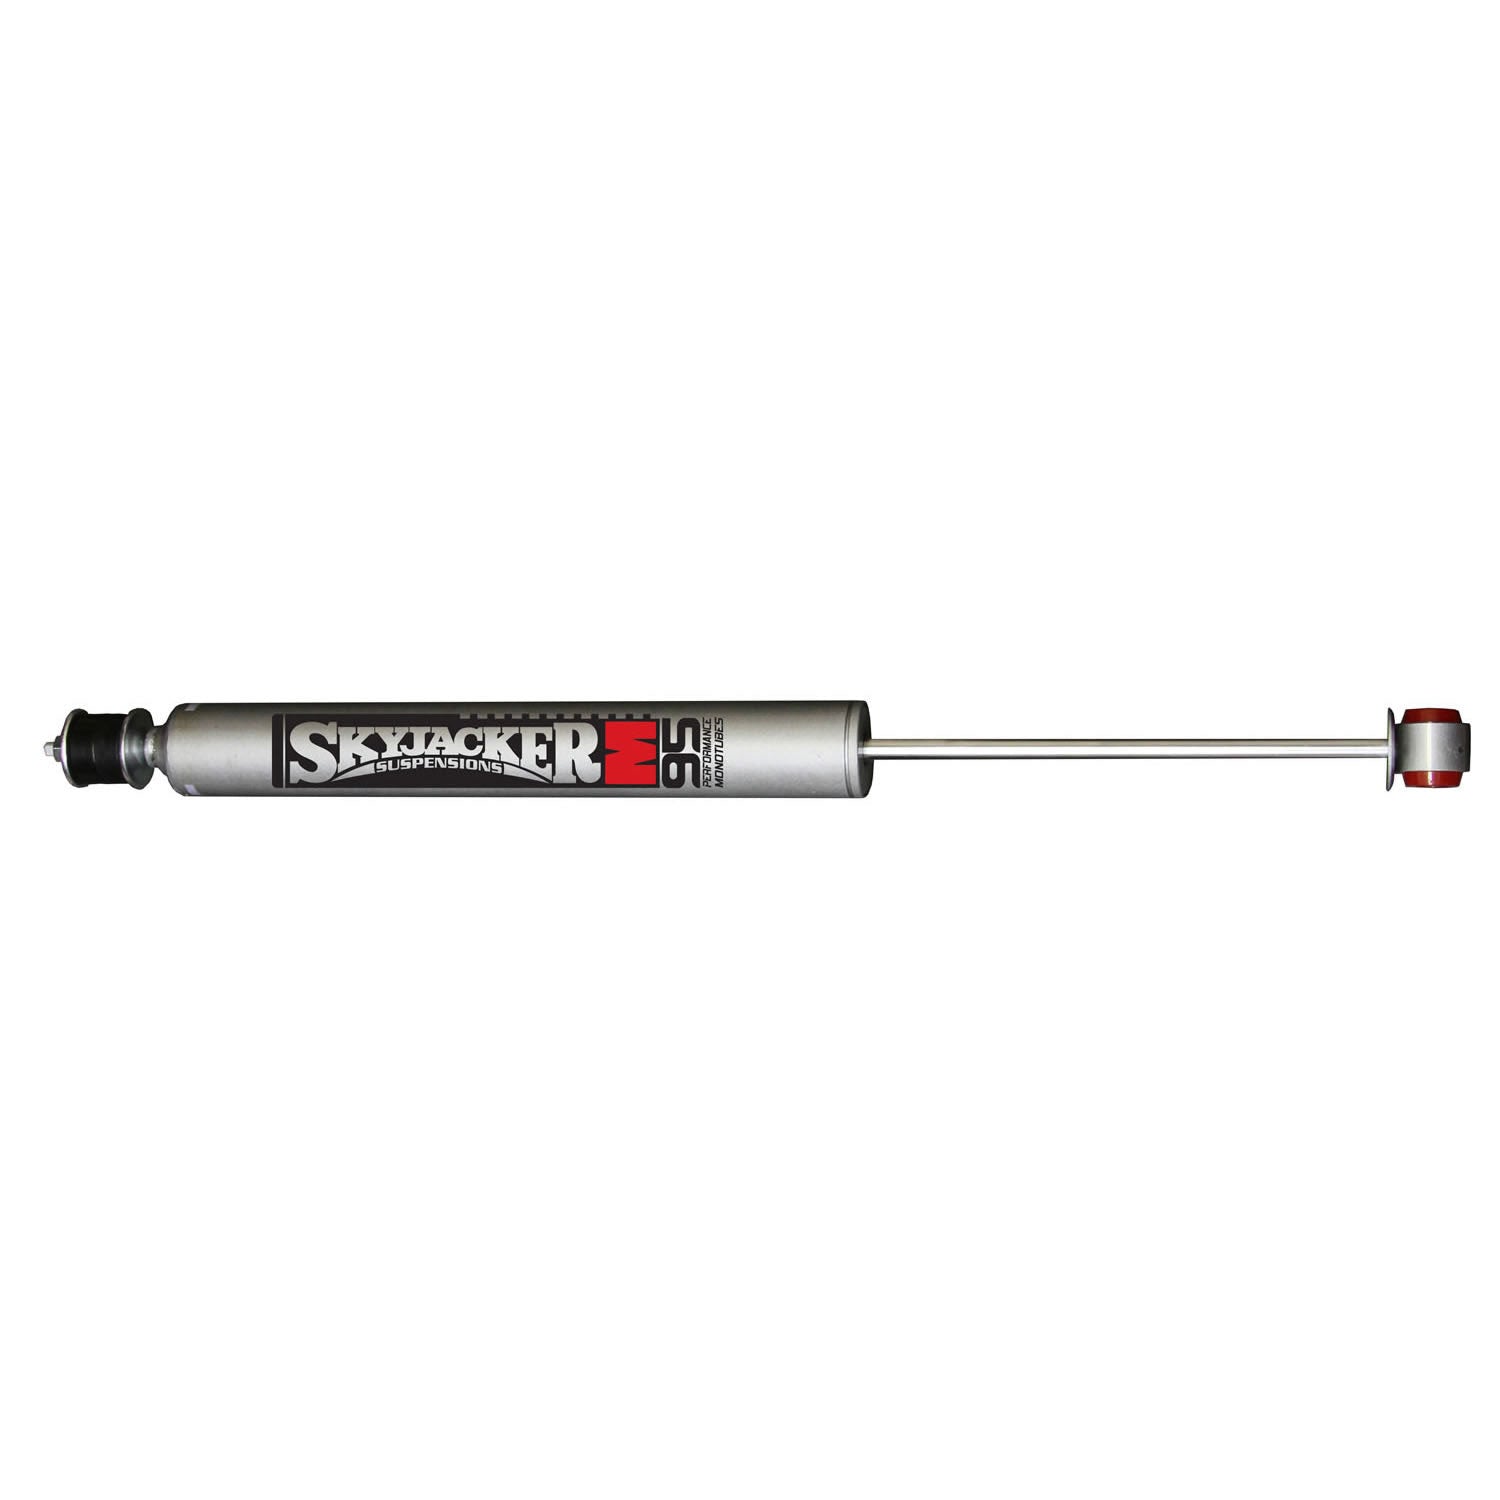 M95 Performance Monotube Shock Absorber 22.63 Inch Extended 13.75 Inch Collapsed Skyjacker